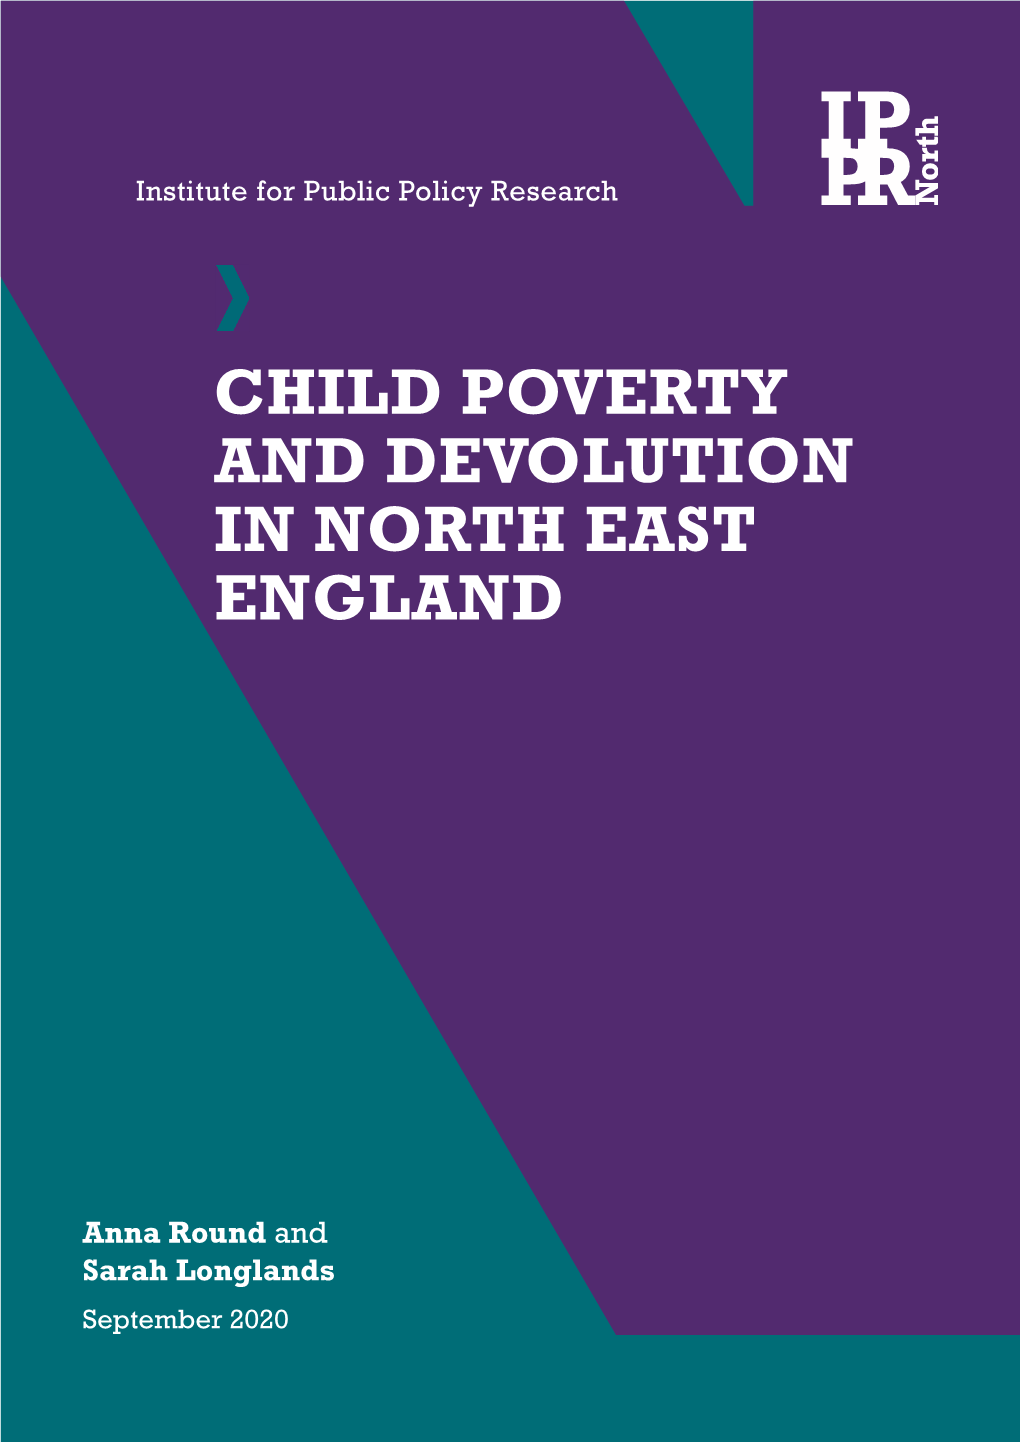 Child Poverty and Devolution in North East England